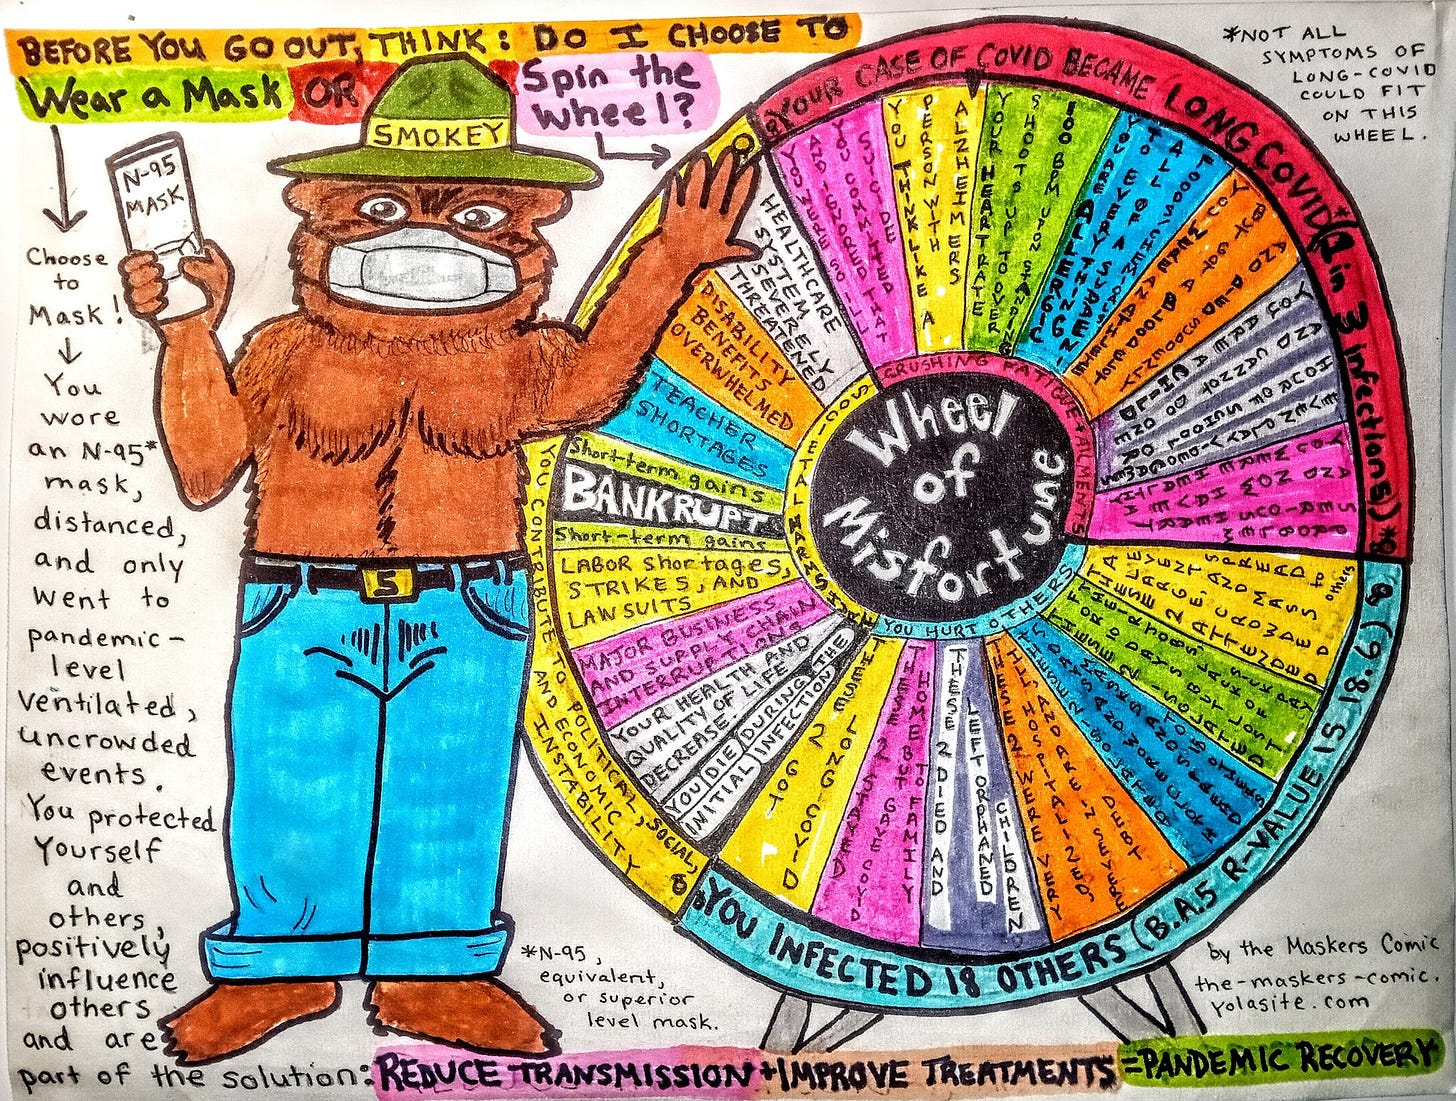 The Maskers Comic Smokey Bear drawing of Smokey who is wearing his ranger campaign hat and jeans and also is wearing a mask with a package in his hand labeled N95 Mask. He’s standing next to a gambler’s lottery wheel that’s labeled Wheel of Misfortune, it has a lot of bad things listed that can happen from getting covid such as supply chain issues, bankruptcy, long covid symptoms, and infecting other people. And a caption reads Before you go out think Do I choose to wear a mask or spin the wheel?